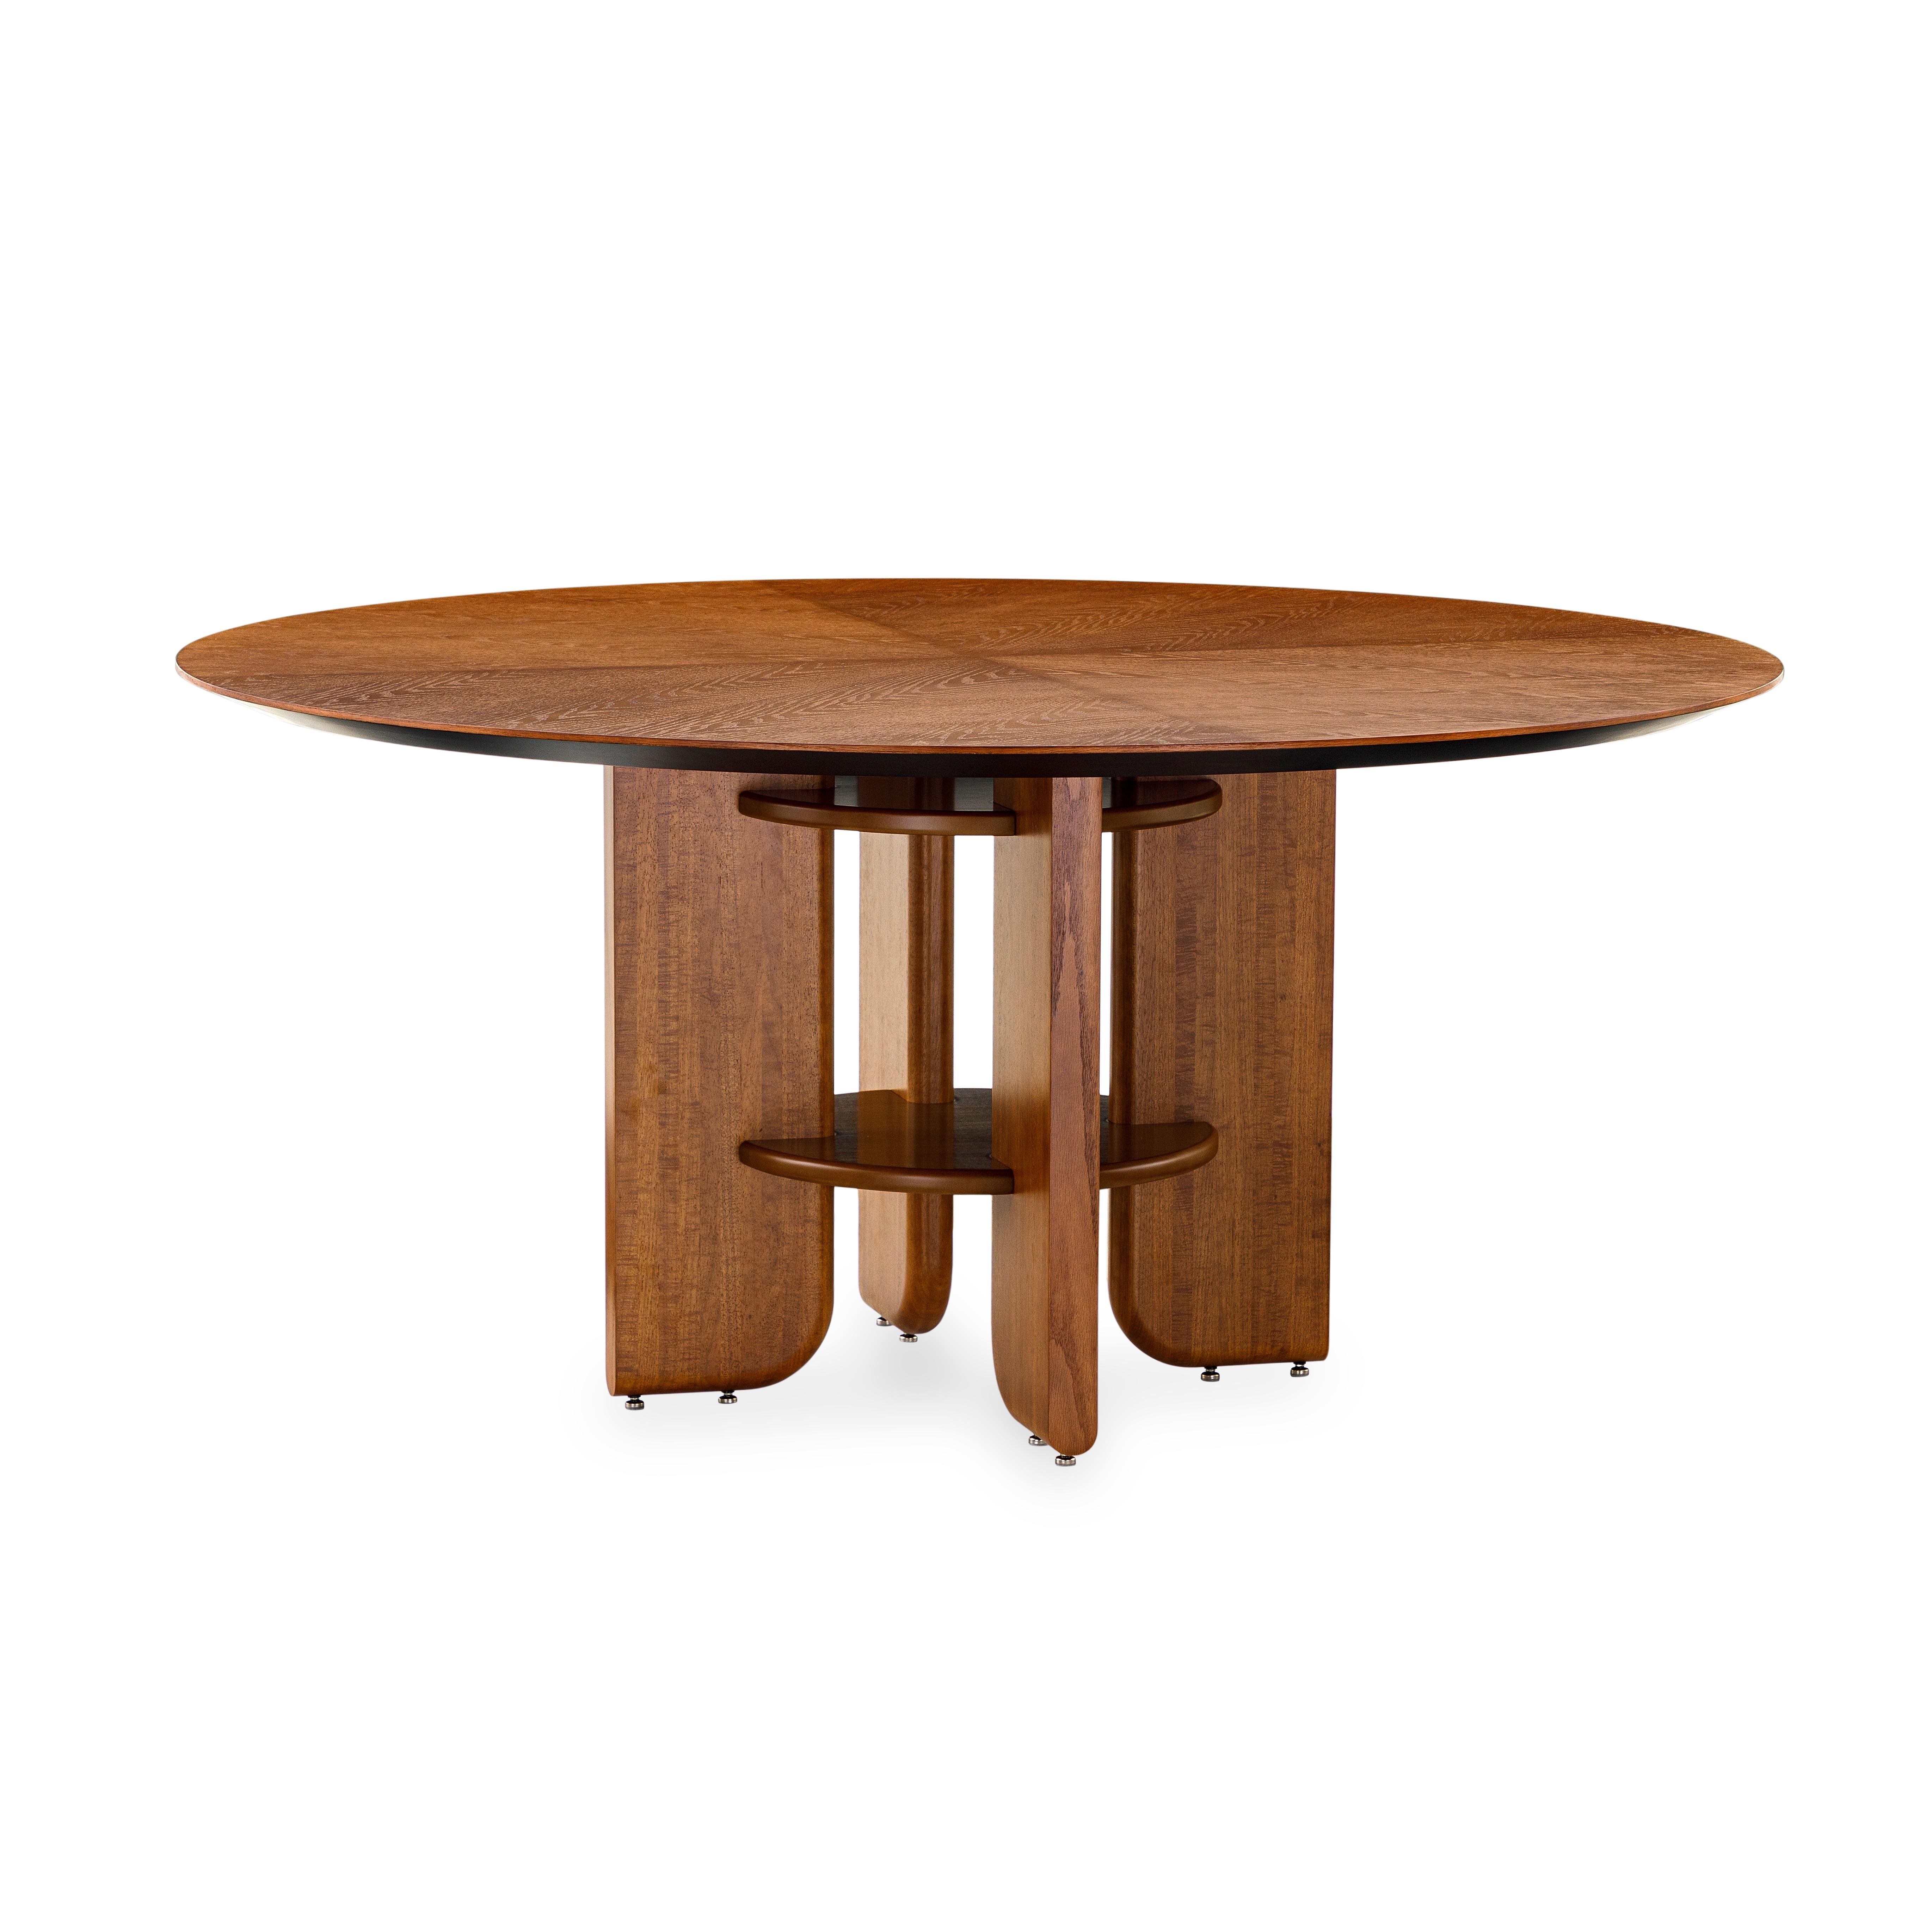 This round dining table in an almond oak veneered top finish with oak wood legs is the perfect table for your house. Every dining space needs a good dining table and the Moon round table is going to be perfect for that space, with an exclusive